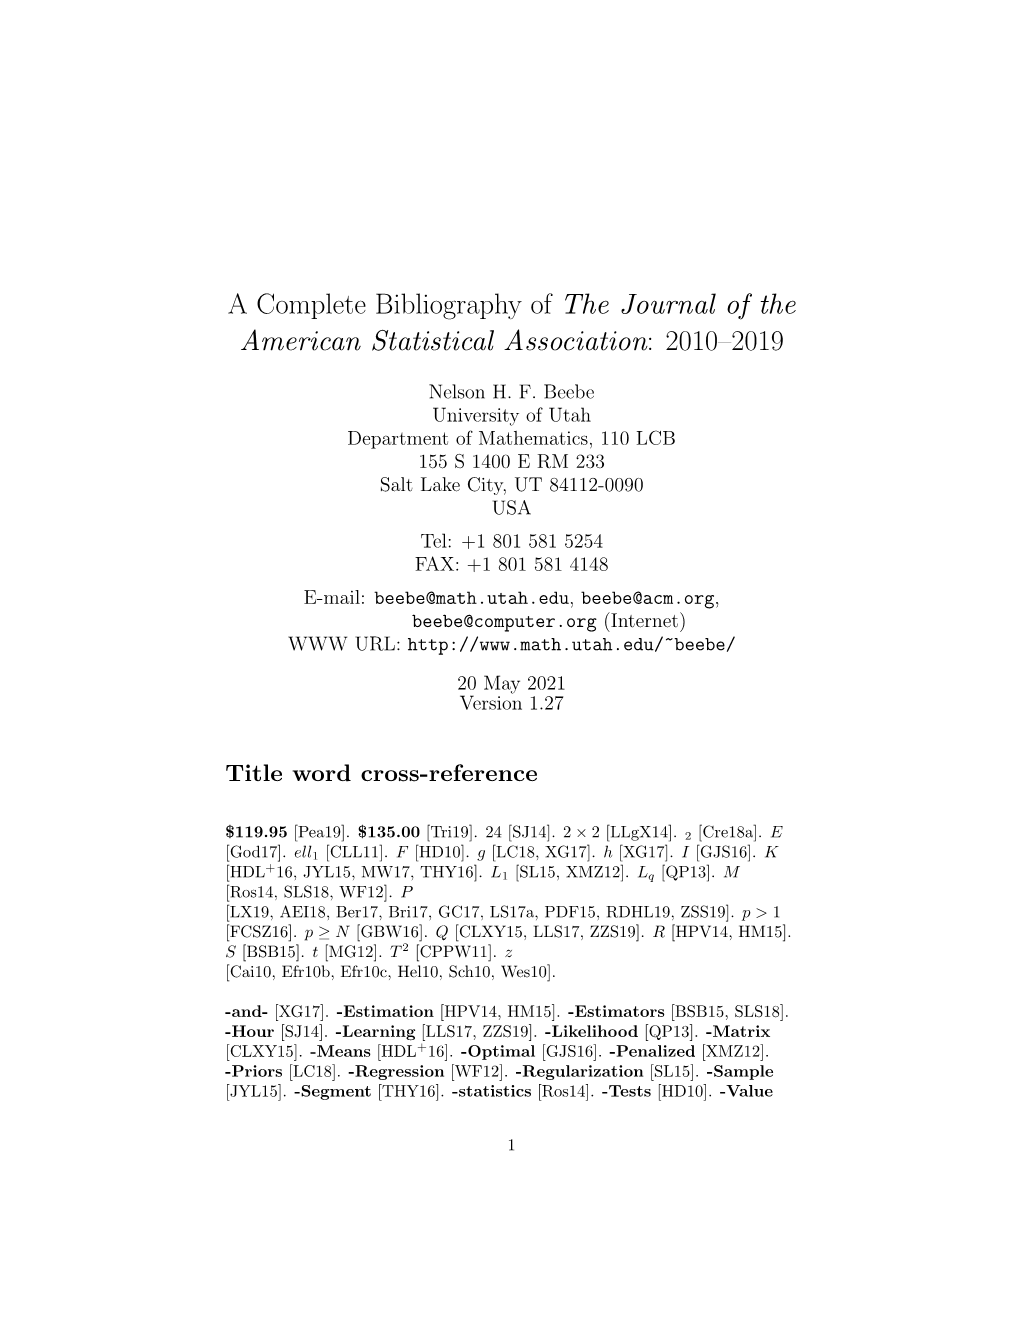 A Complete Bibliography of the Journal of the American Statistical Association: 2010–2019